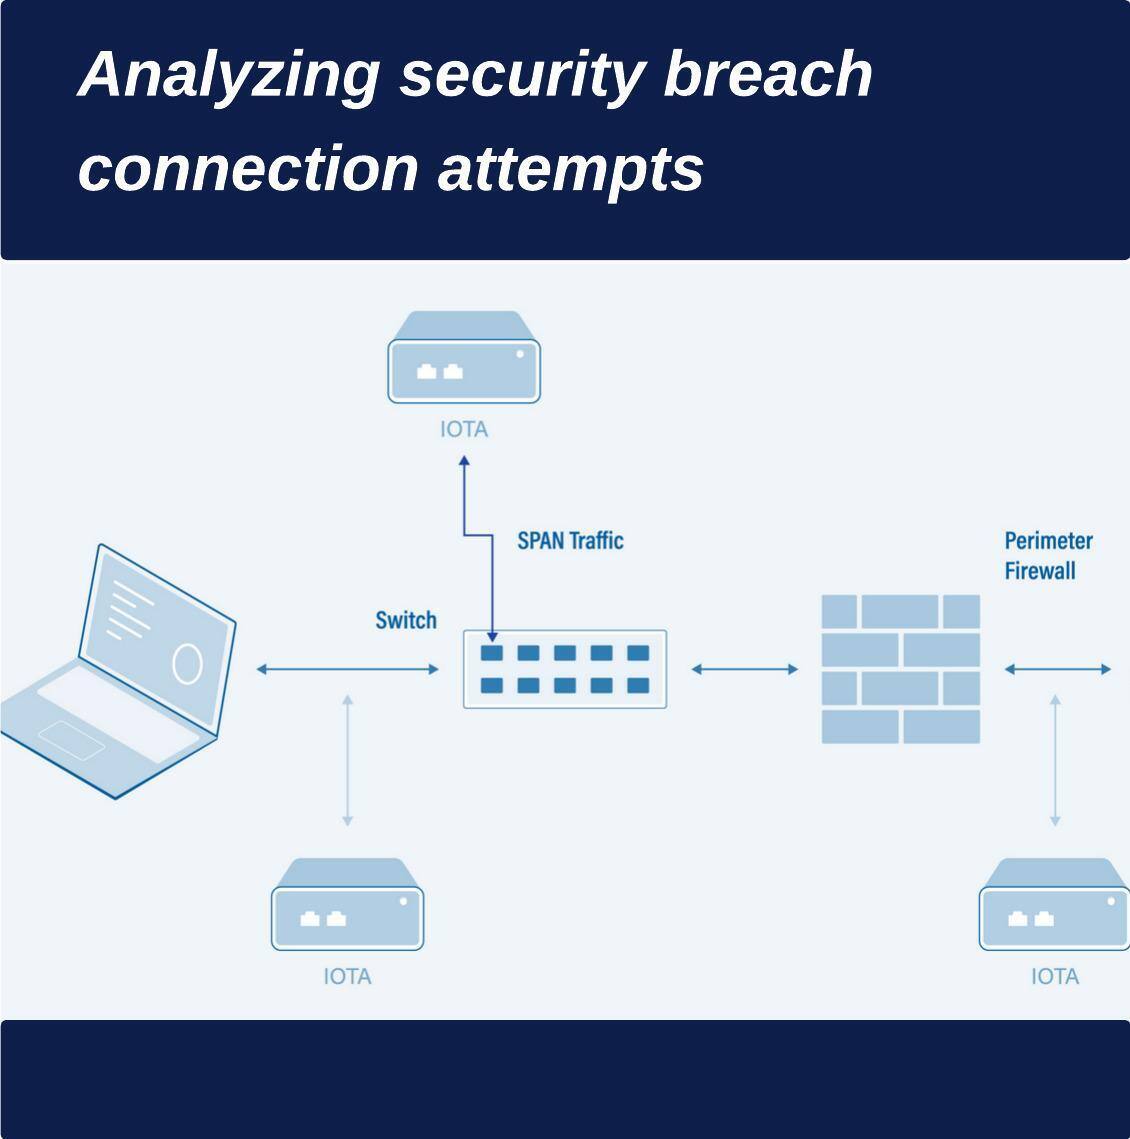 Analyzing security breach connection attempts with IOTA